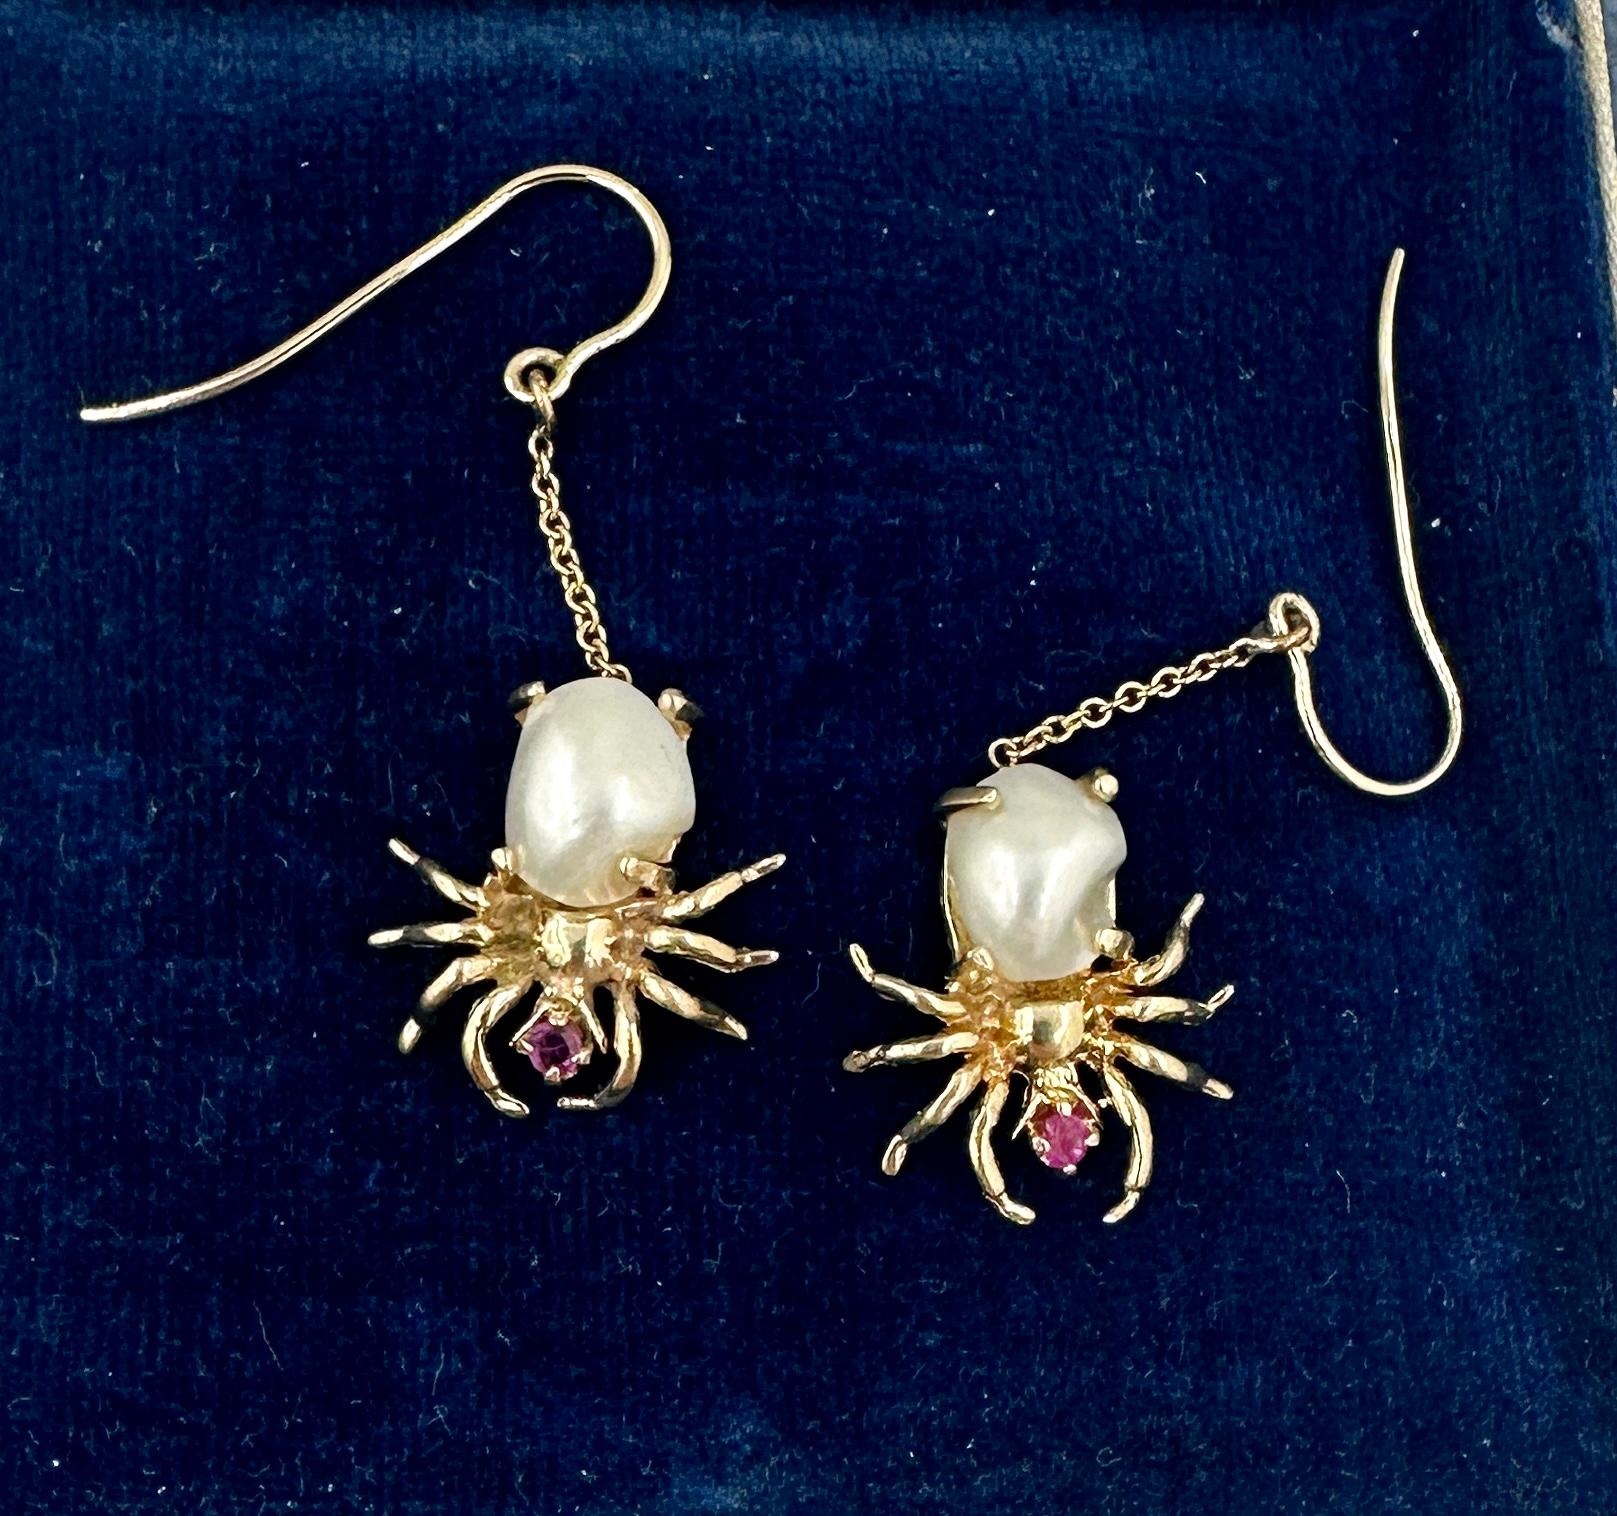 This is a wonderful pair of rare antique Spider Insect Earrings with Pearl bodies and Ruby heads in Yellow Gold.  The spider insect jewels are beautifully made and the dangle drop earrings an absolute delight to wear.  The pearls are exquisite